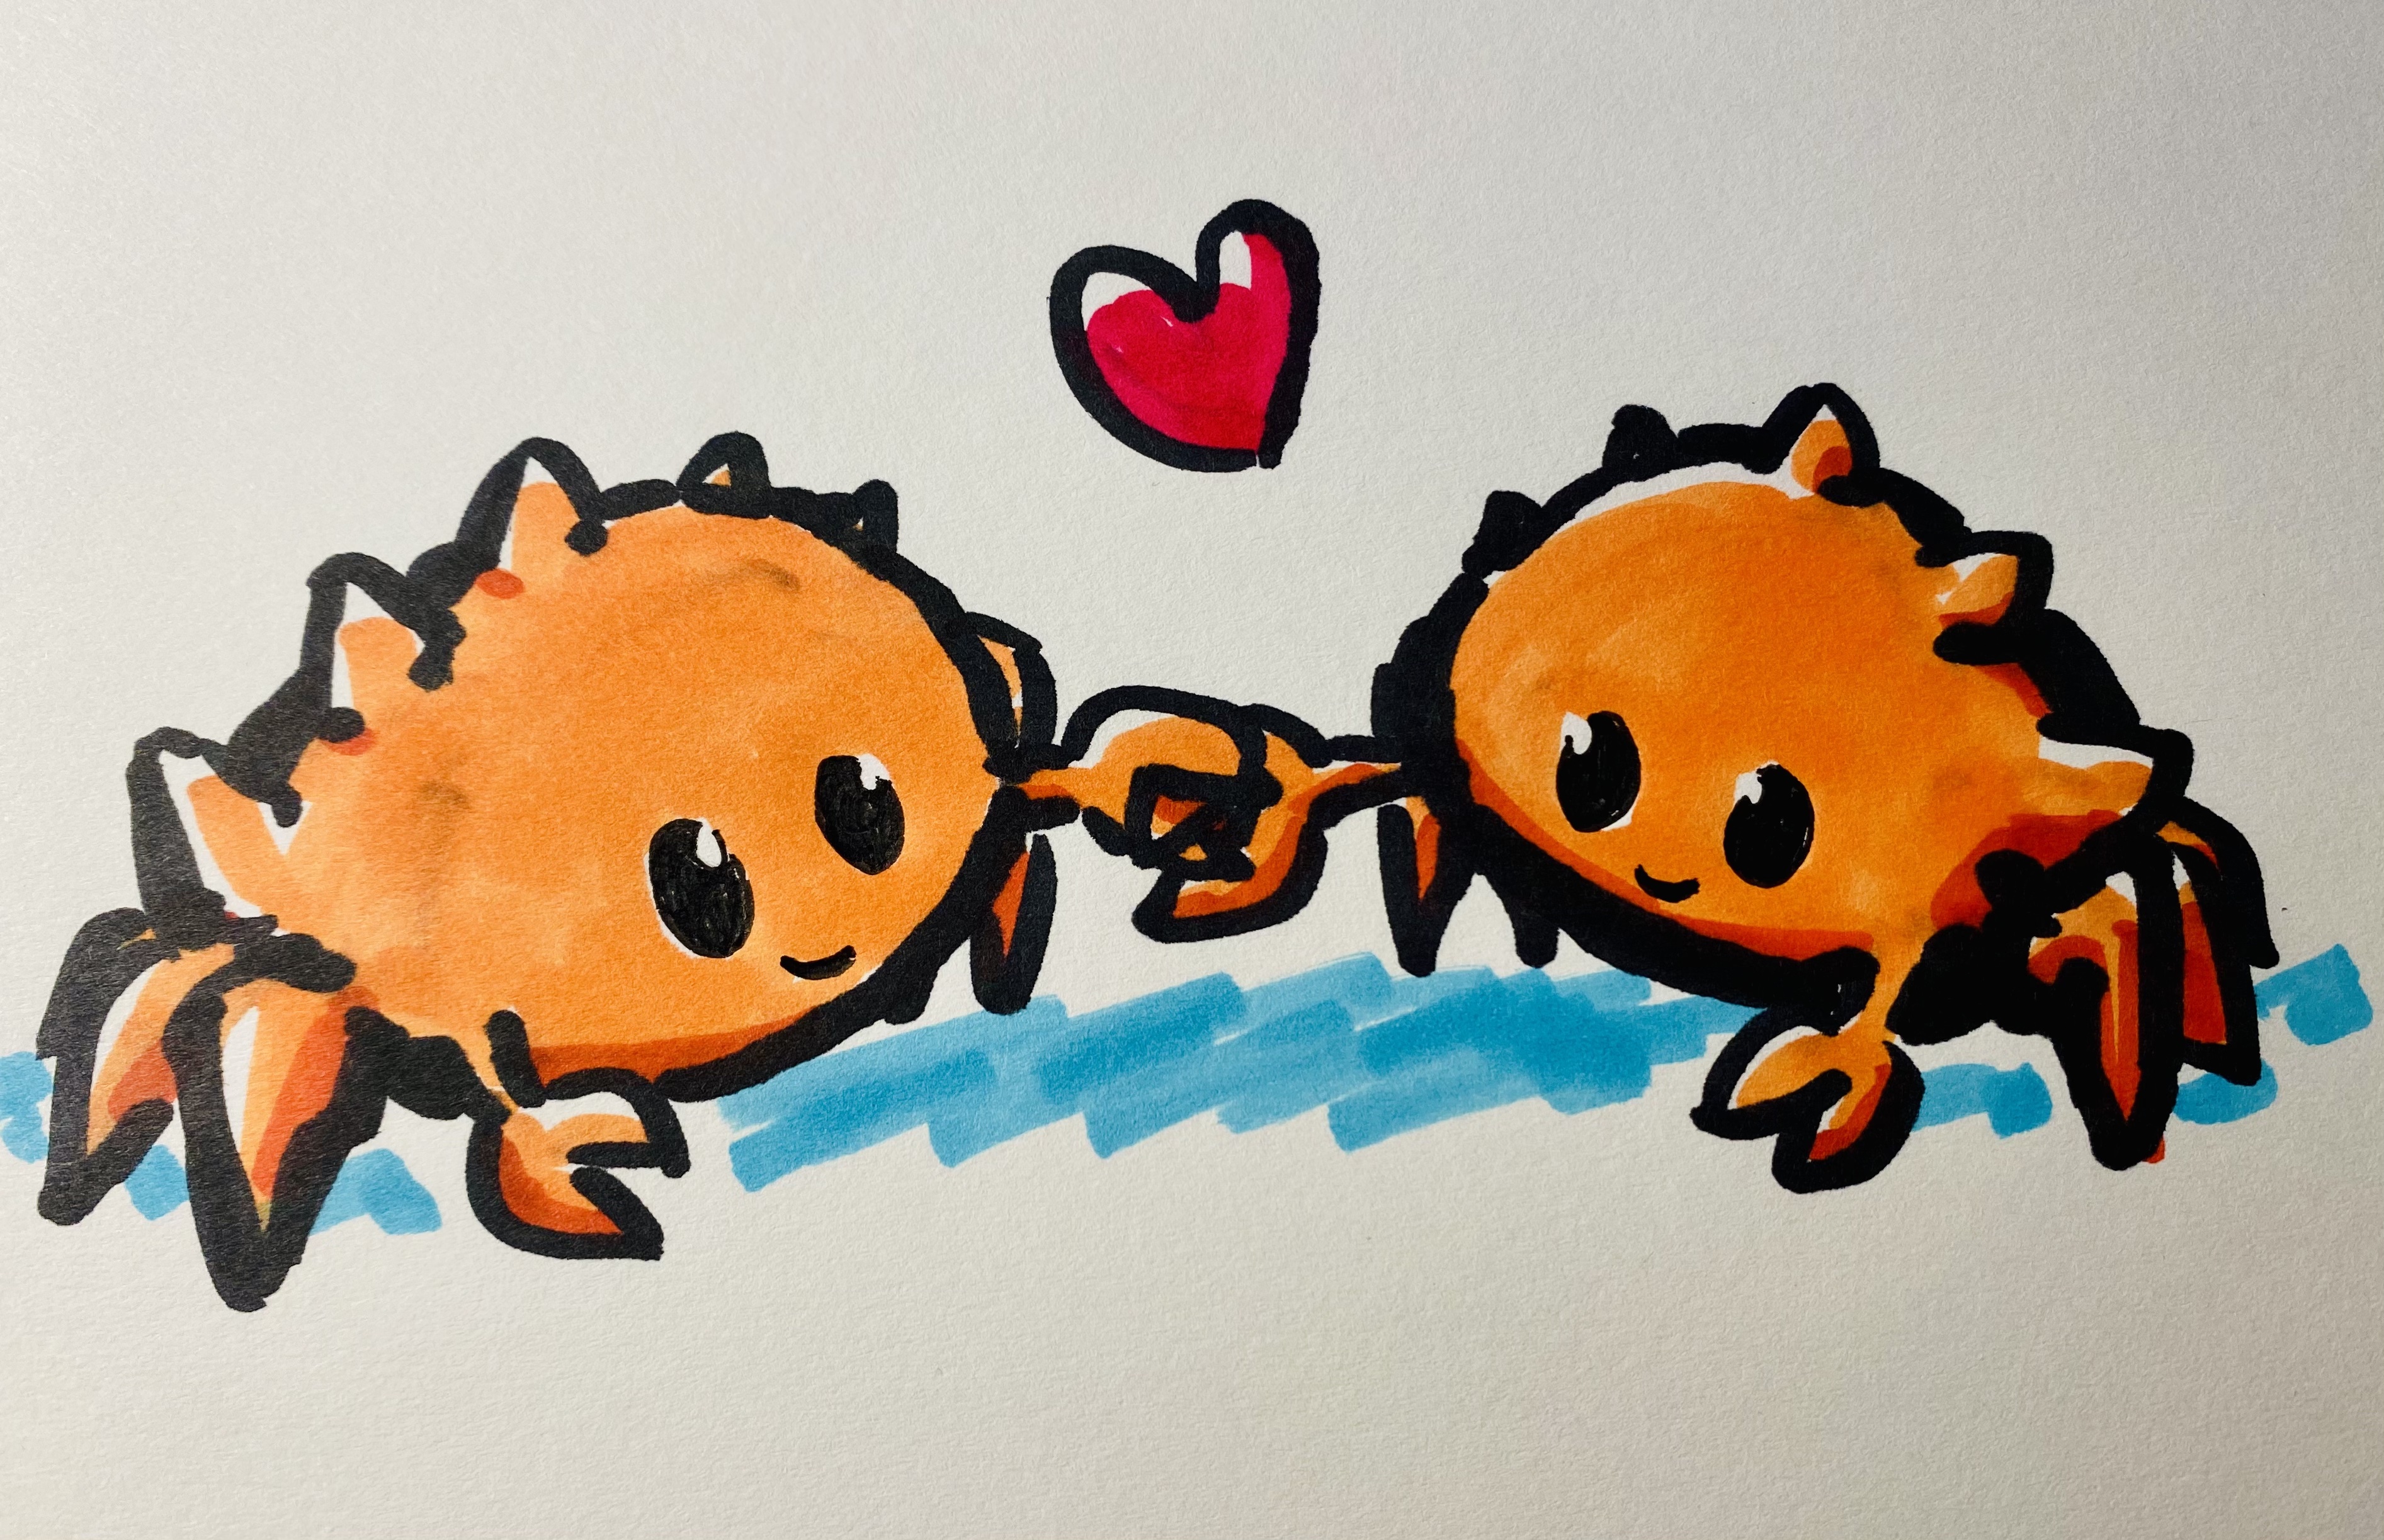 Two ferris crabs holding hands (well, claws) with a heart overhead